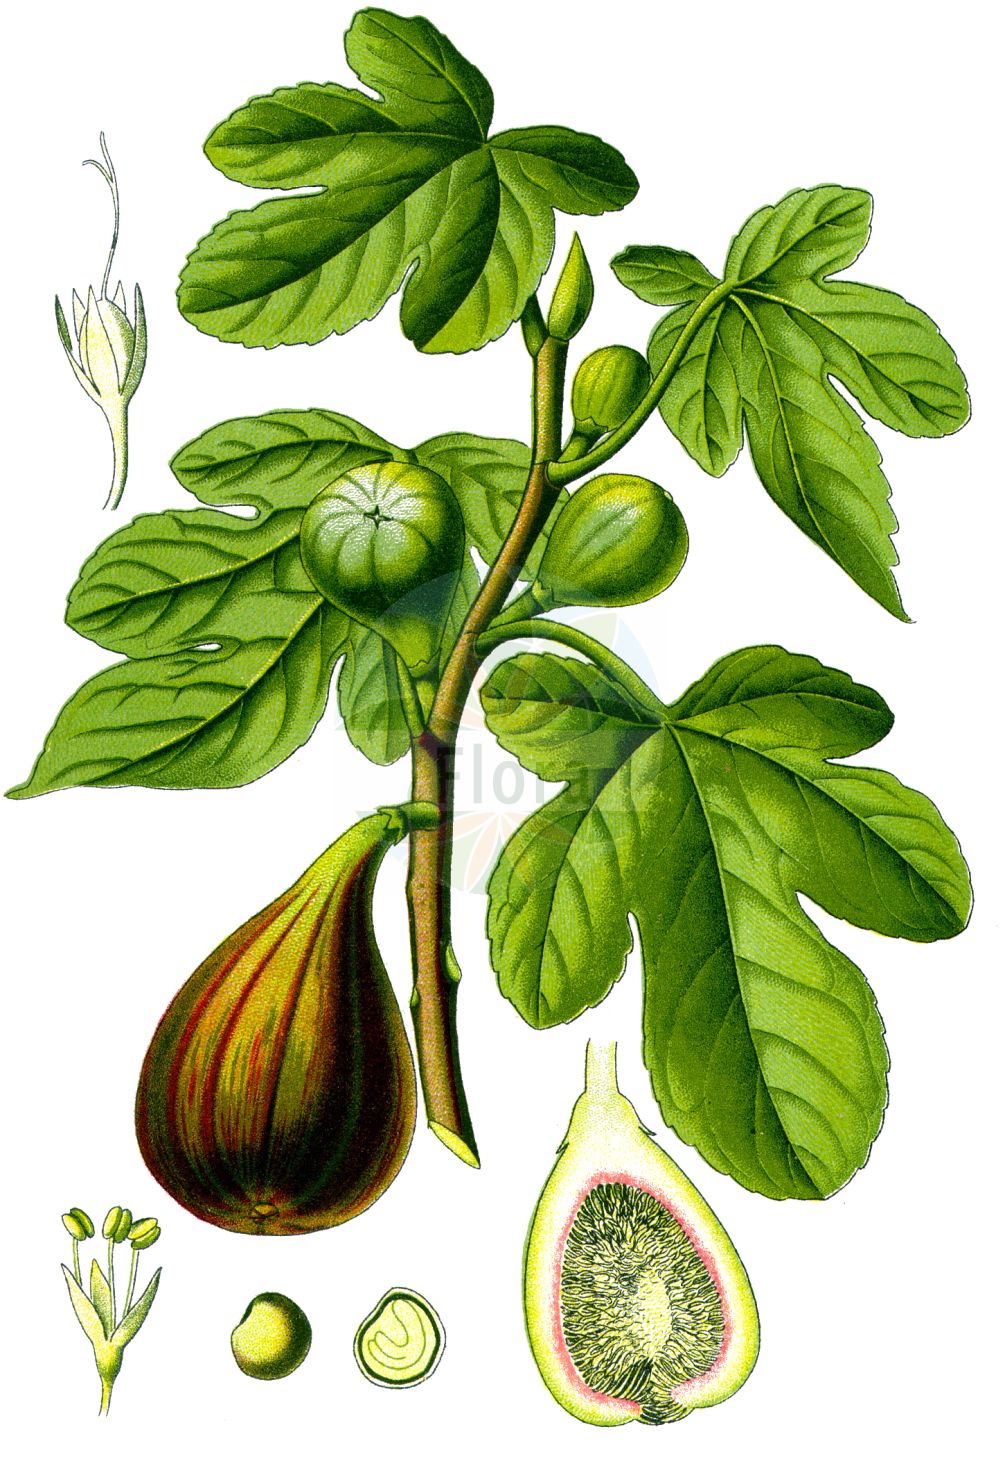 Historische Abbildung von Ficus carica (Fig). Das Bild zeigt Blatt, Bluete, Frucht und Same. ---- Historical Drawing of Ficus carica (Fig). The image is showing leaf, flower, fruit and seed.(Ficus carica,Fig,Ficus caprificus,Ficus carica,Ficus hyrcana,Ficus,Moraceae,Maulbeergewächse,Mulberry family,Blatt,Bluete,Frucht,Same,leaf,flower,fruit,seed,Thomé (1885))